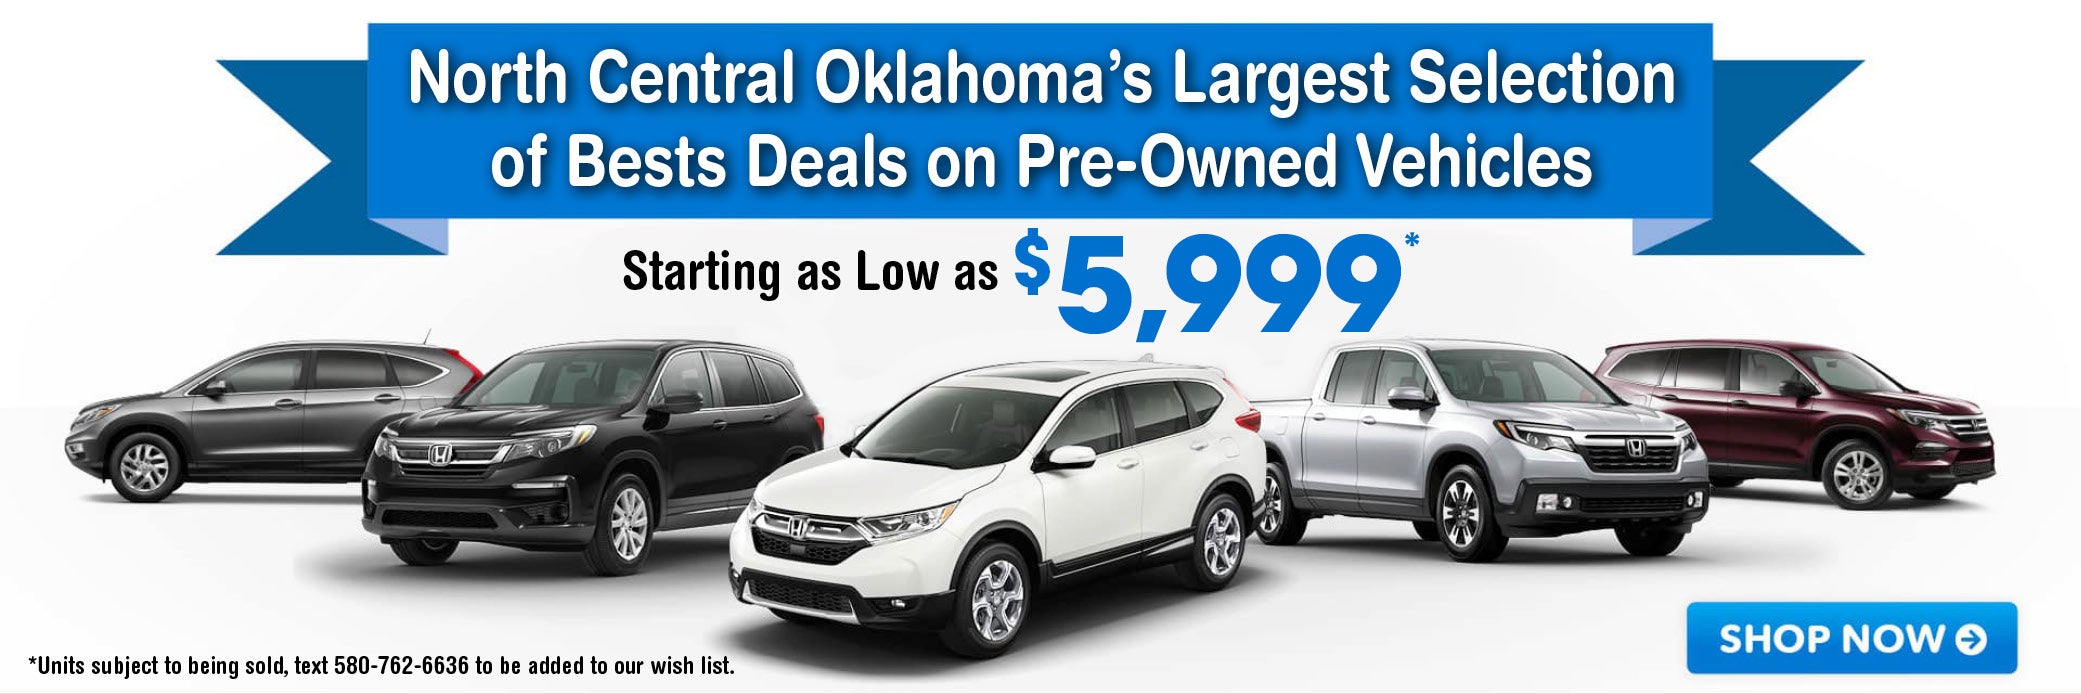 Best Deals on Pre-Owned